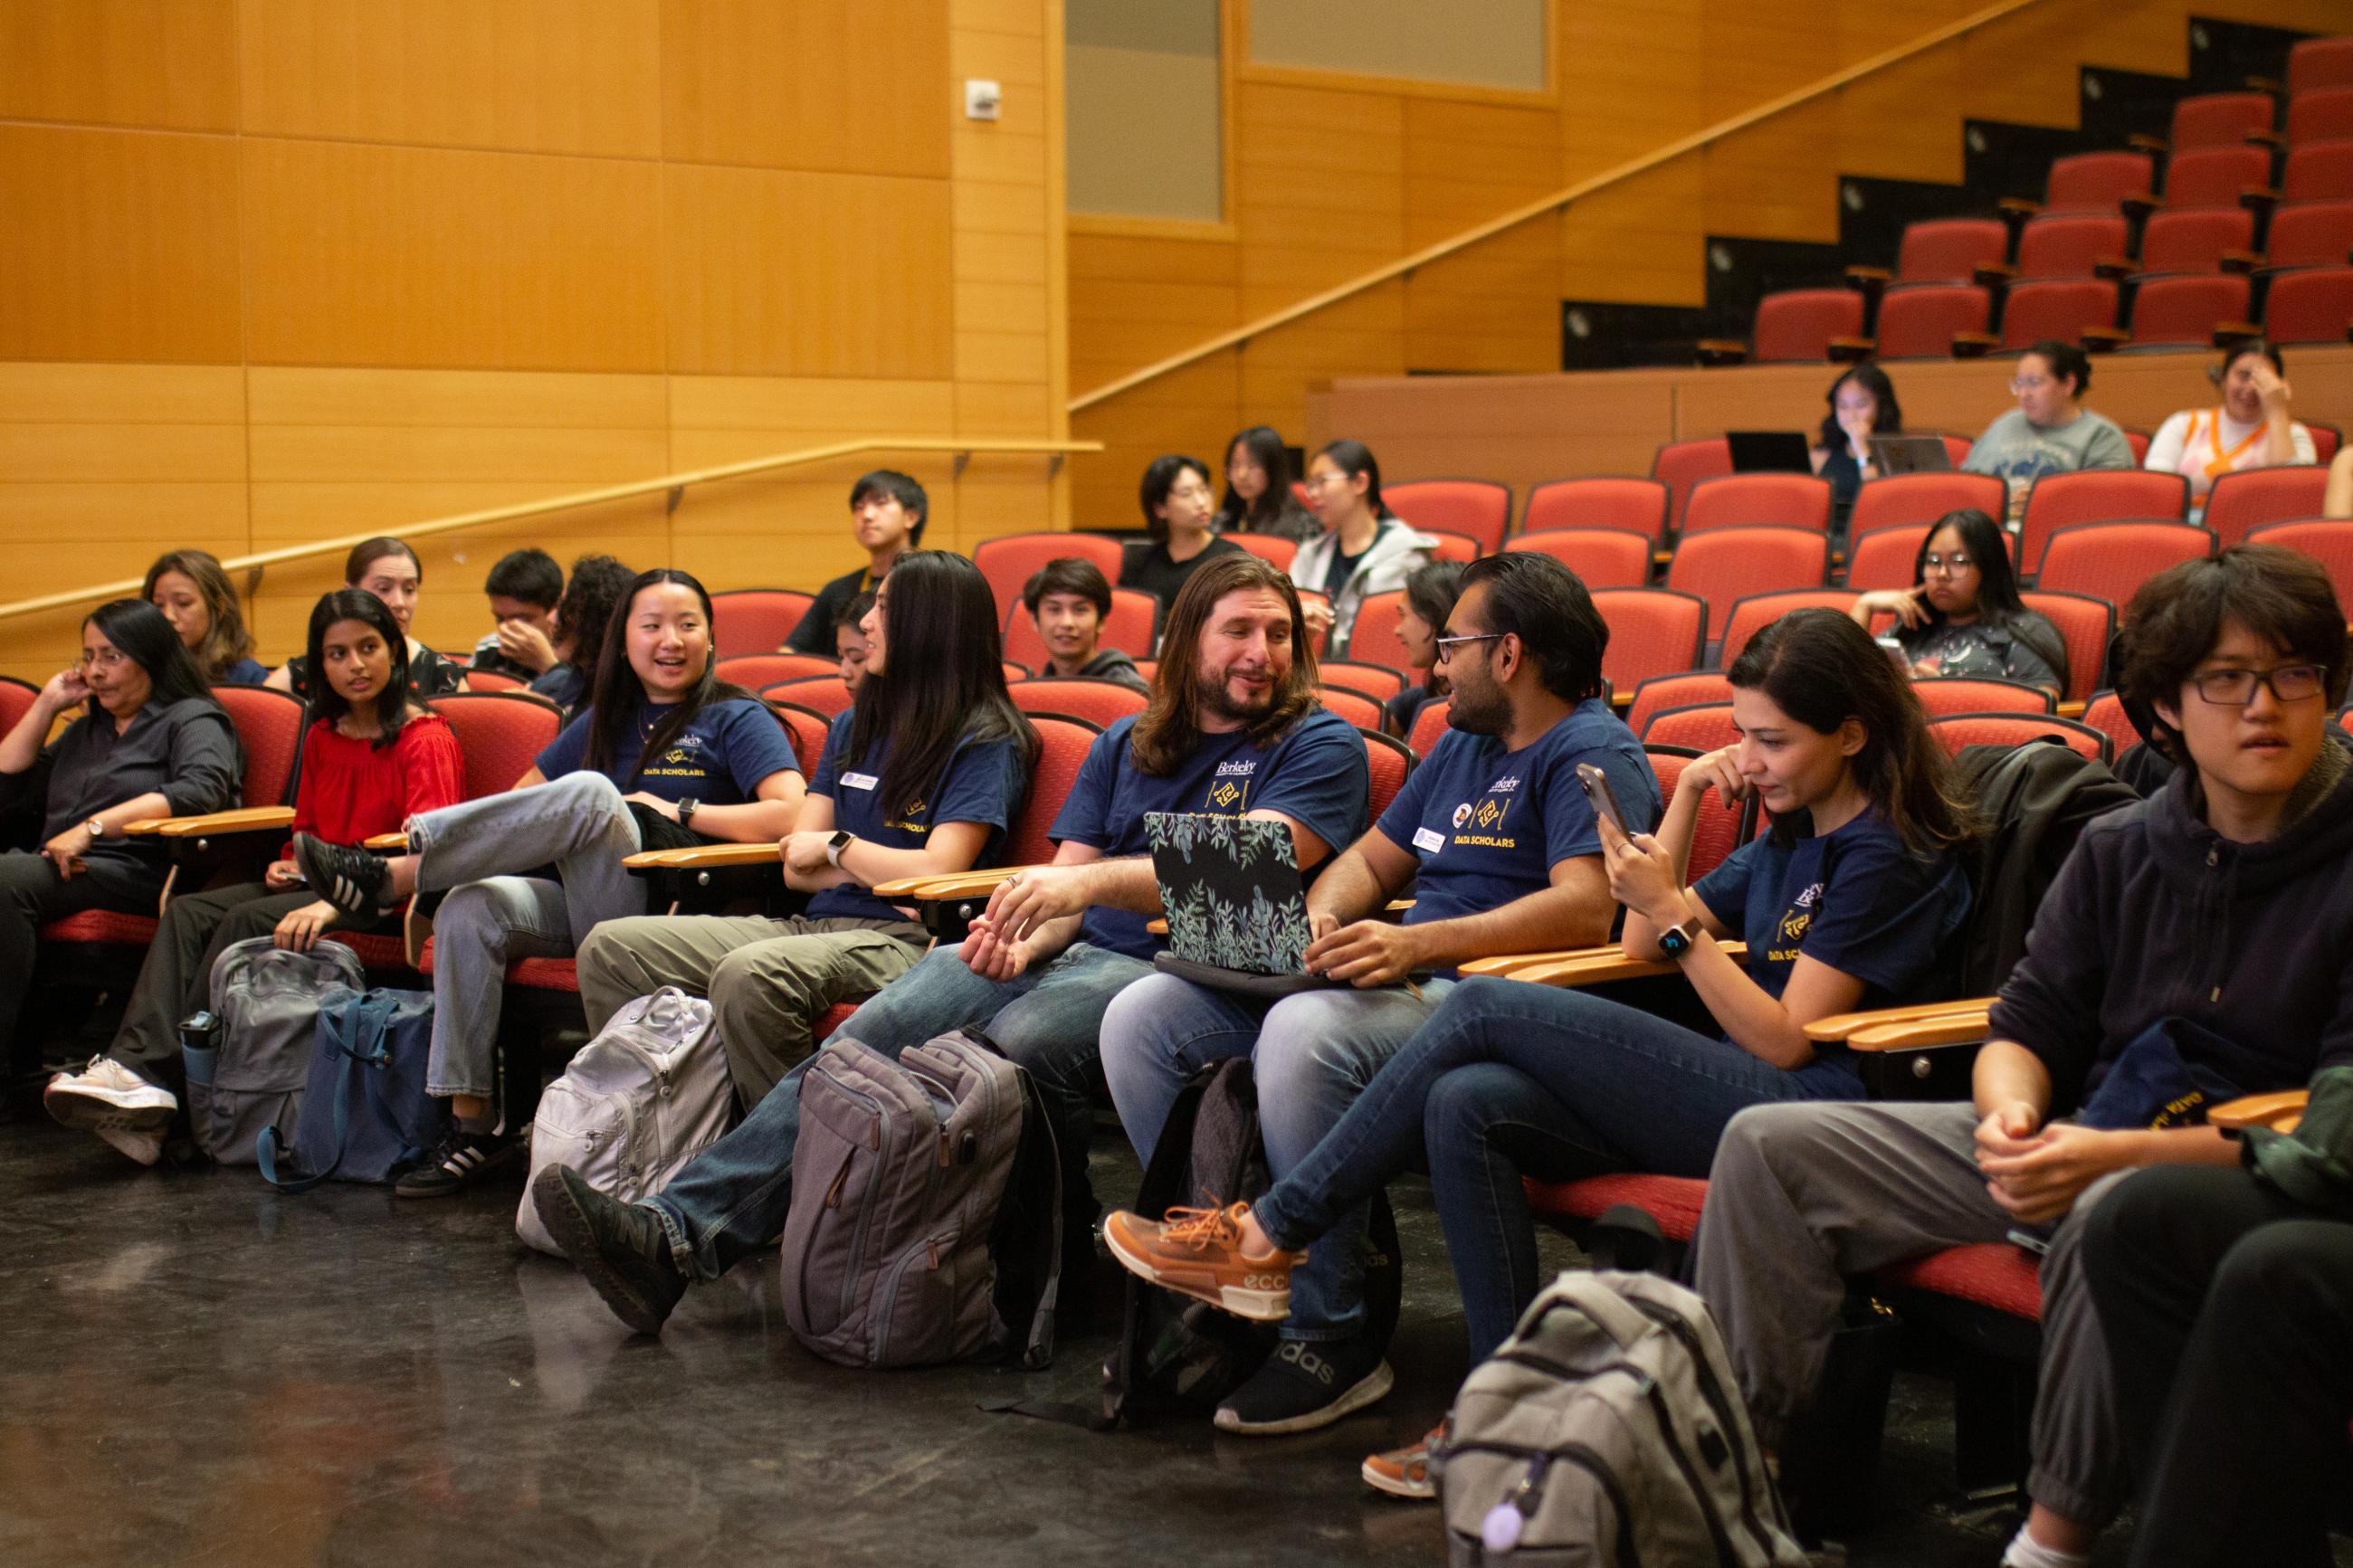 Data Science students talk together in a lecture hall